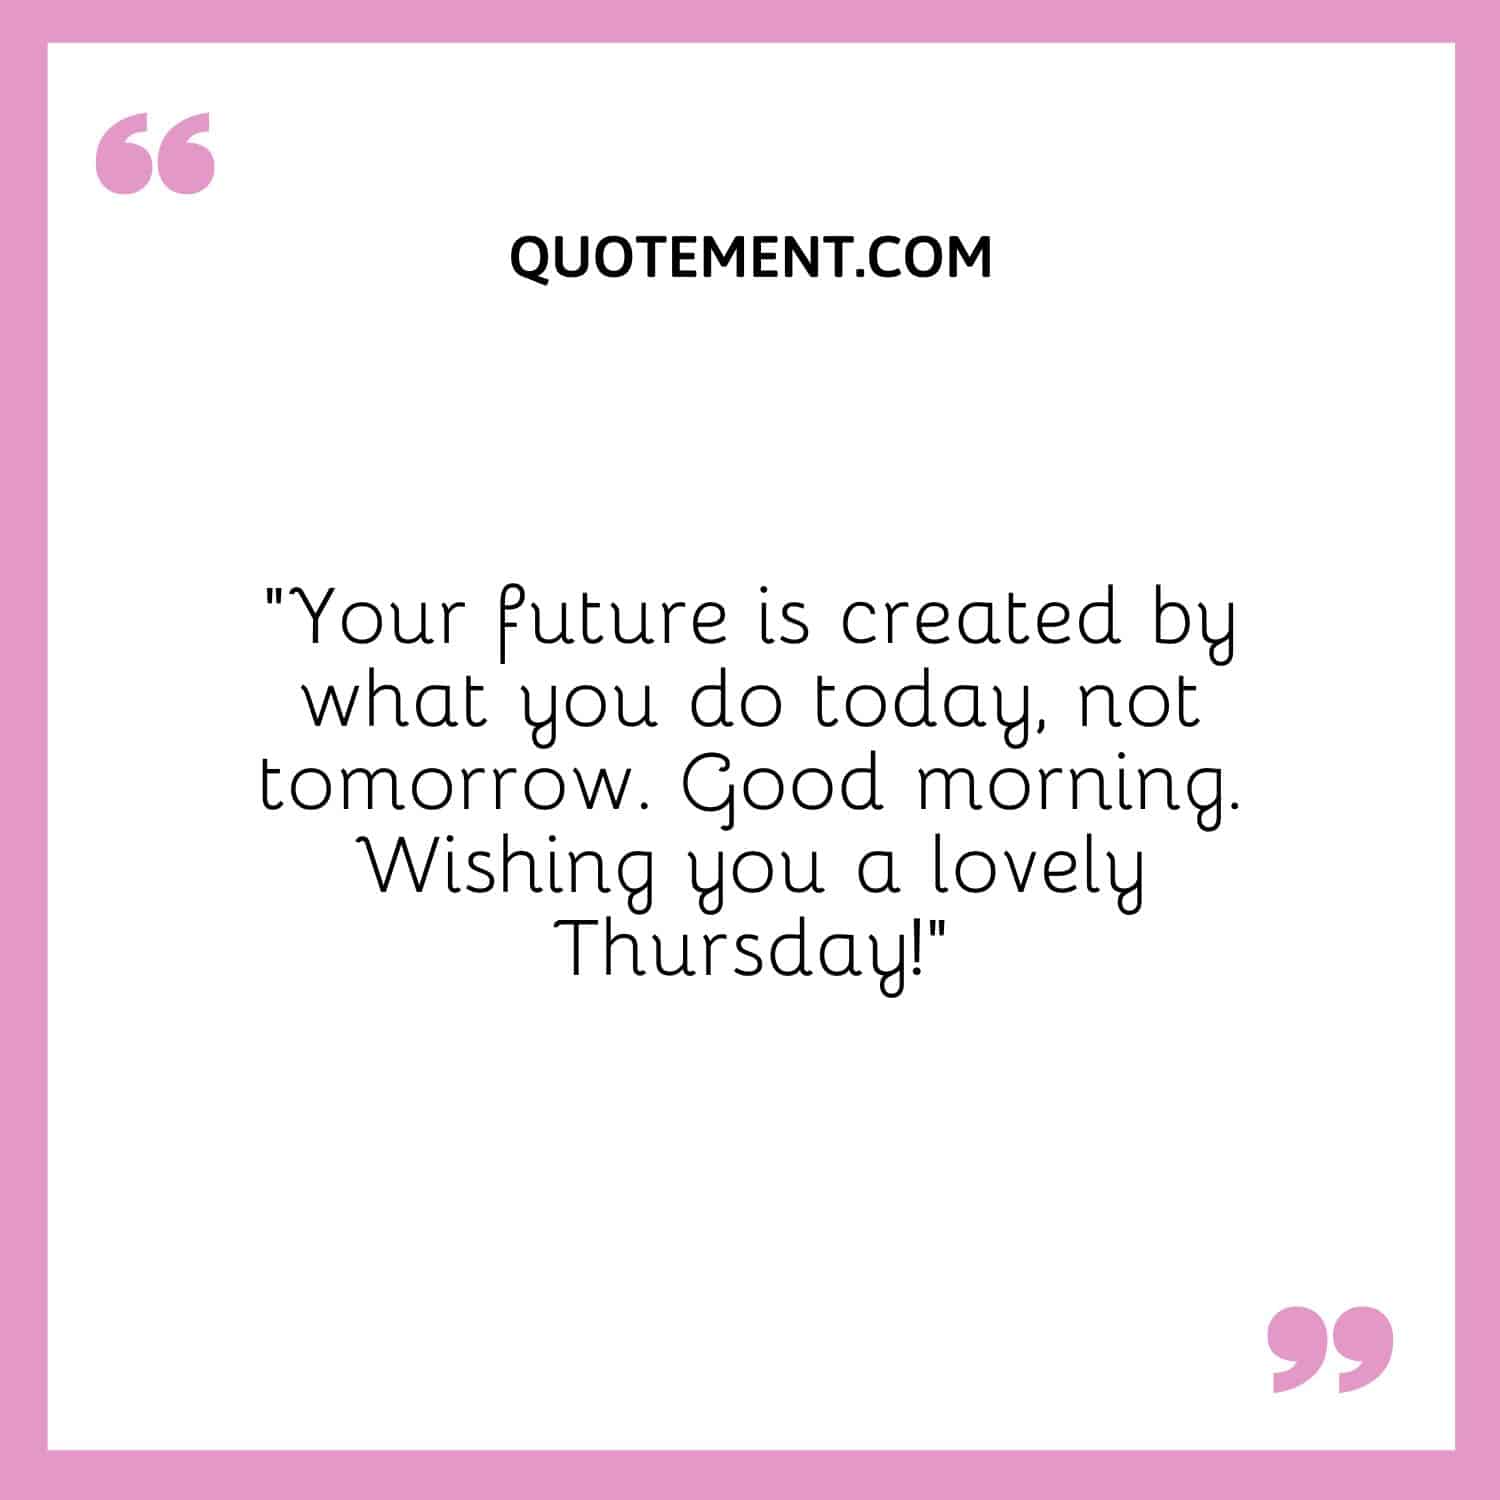 “Your future is created by what you do today, not tomorrow. Good morning. Wishing you a lovely Thursday!”